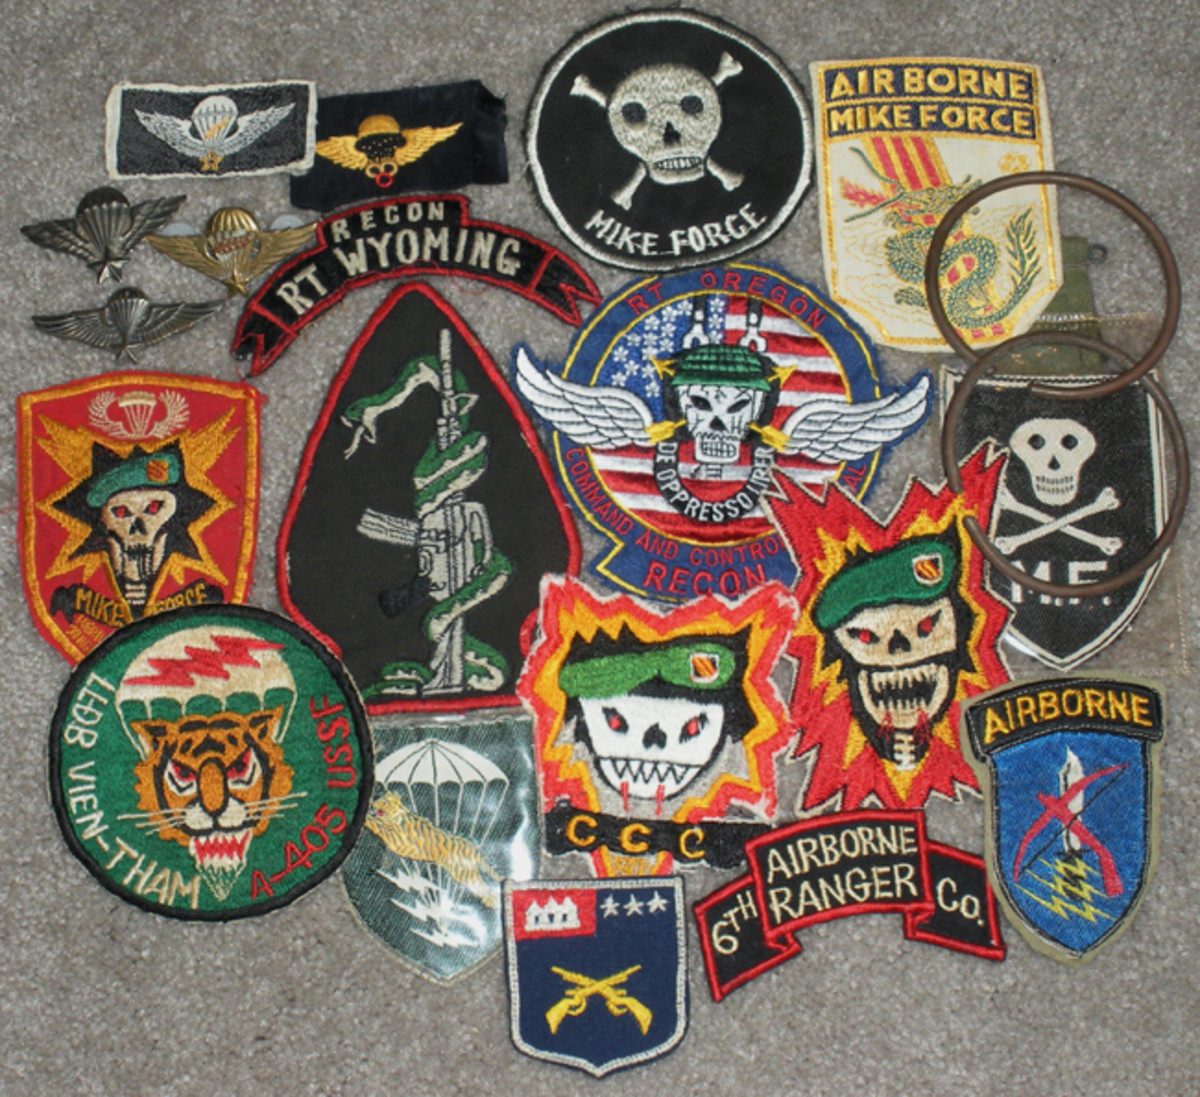 Ed warns, “Vietnam Special Force and MACV-SOG patches are among the most desirable insignia ever produced, but authentic pieces made during the war are actually quite scarce and in many cases, rare as hell. Having a SOG team member’s pocket patch made just for his team may have subtle differences with the “Cheap Charlie” patches made for collectors. Both were made during the war, but the identified team patch will command many times what the locally made collectors patch will bring.”